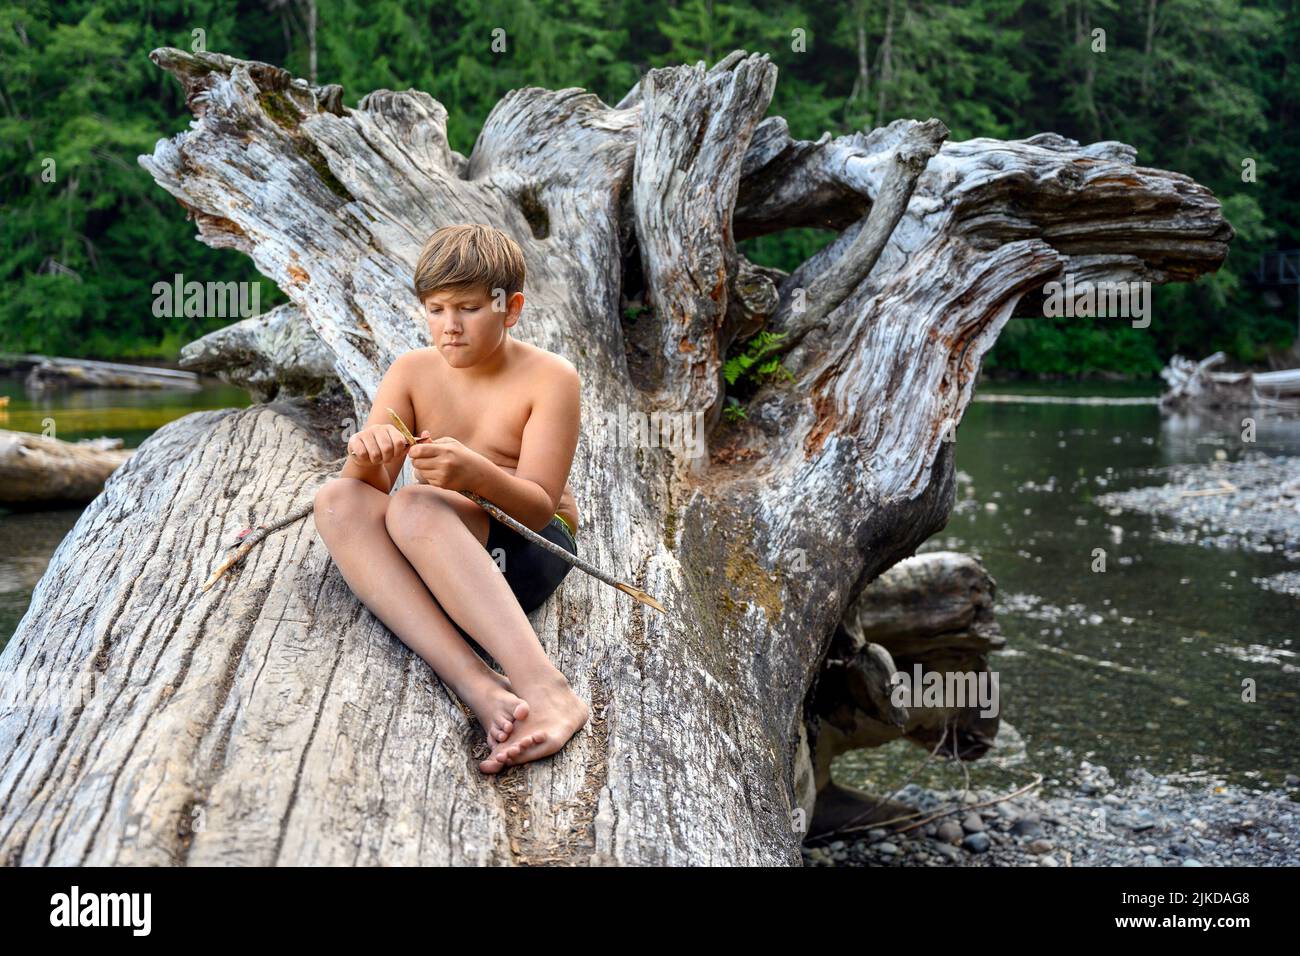 10 years old young boy at the campsite, sitting on a fallen tree trunk, and focusing on to carving a wooden stick for the grill with a small pocket Stock Photo